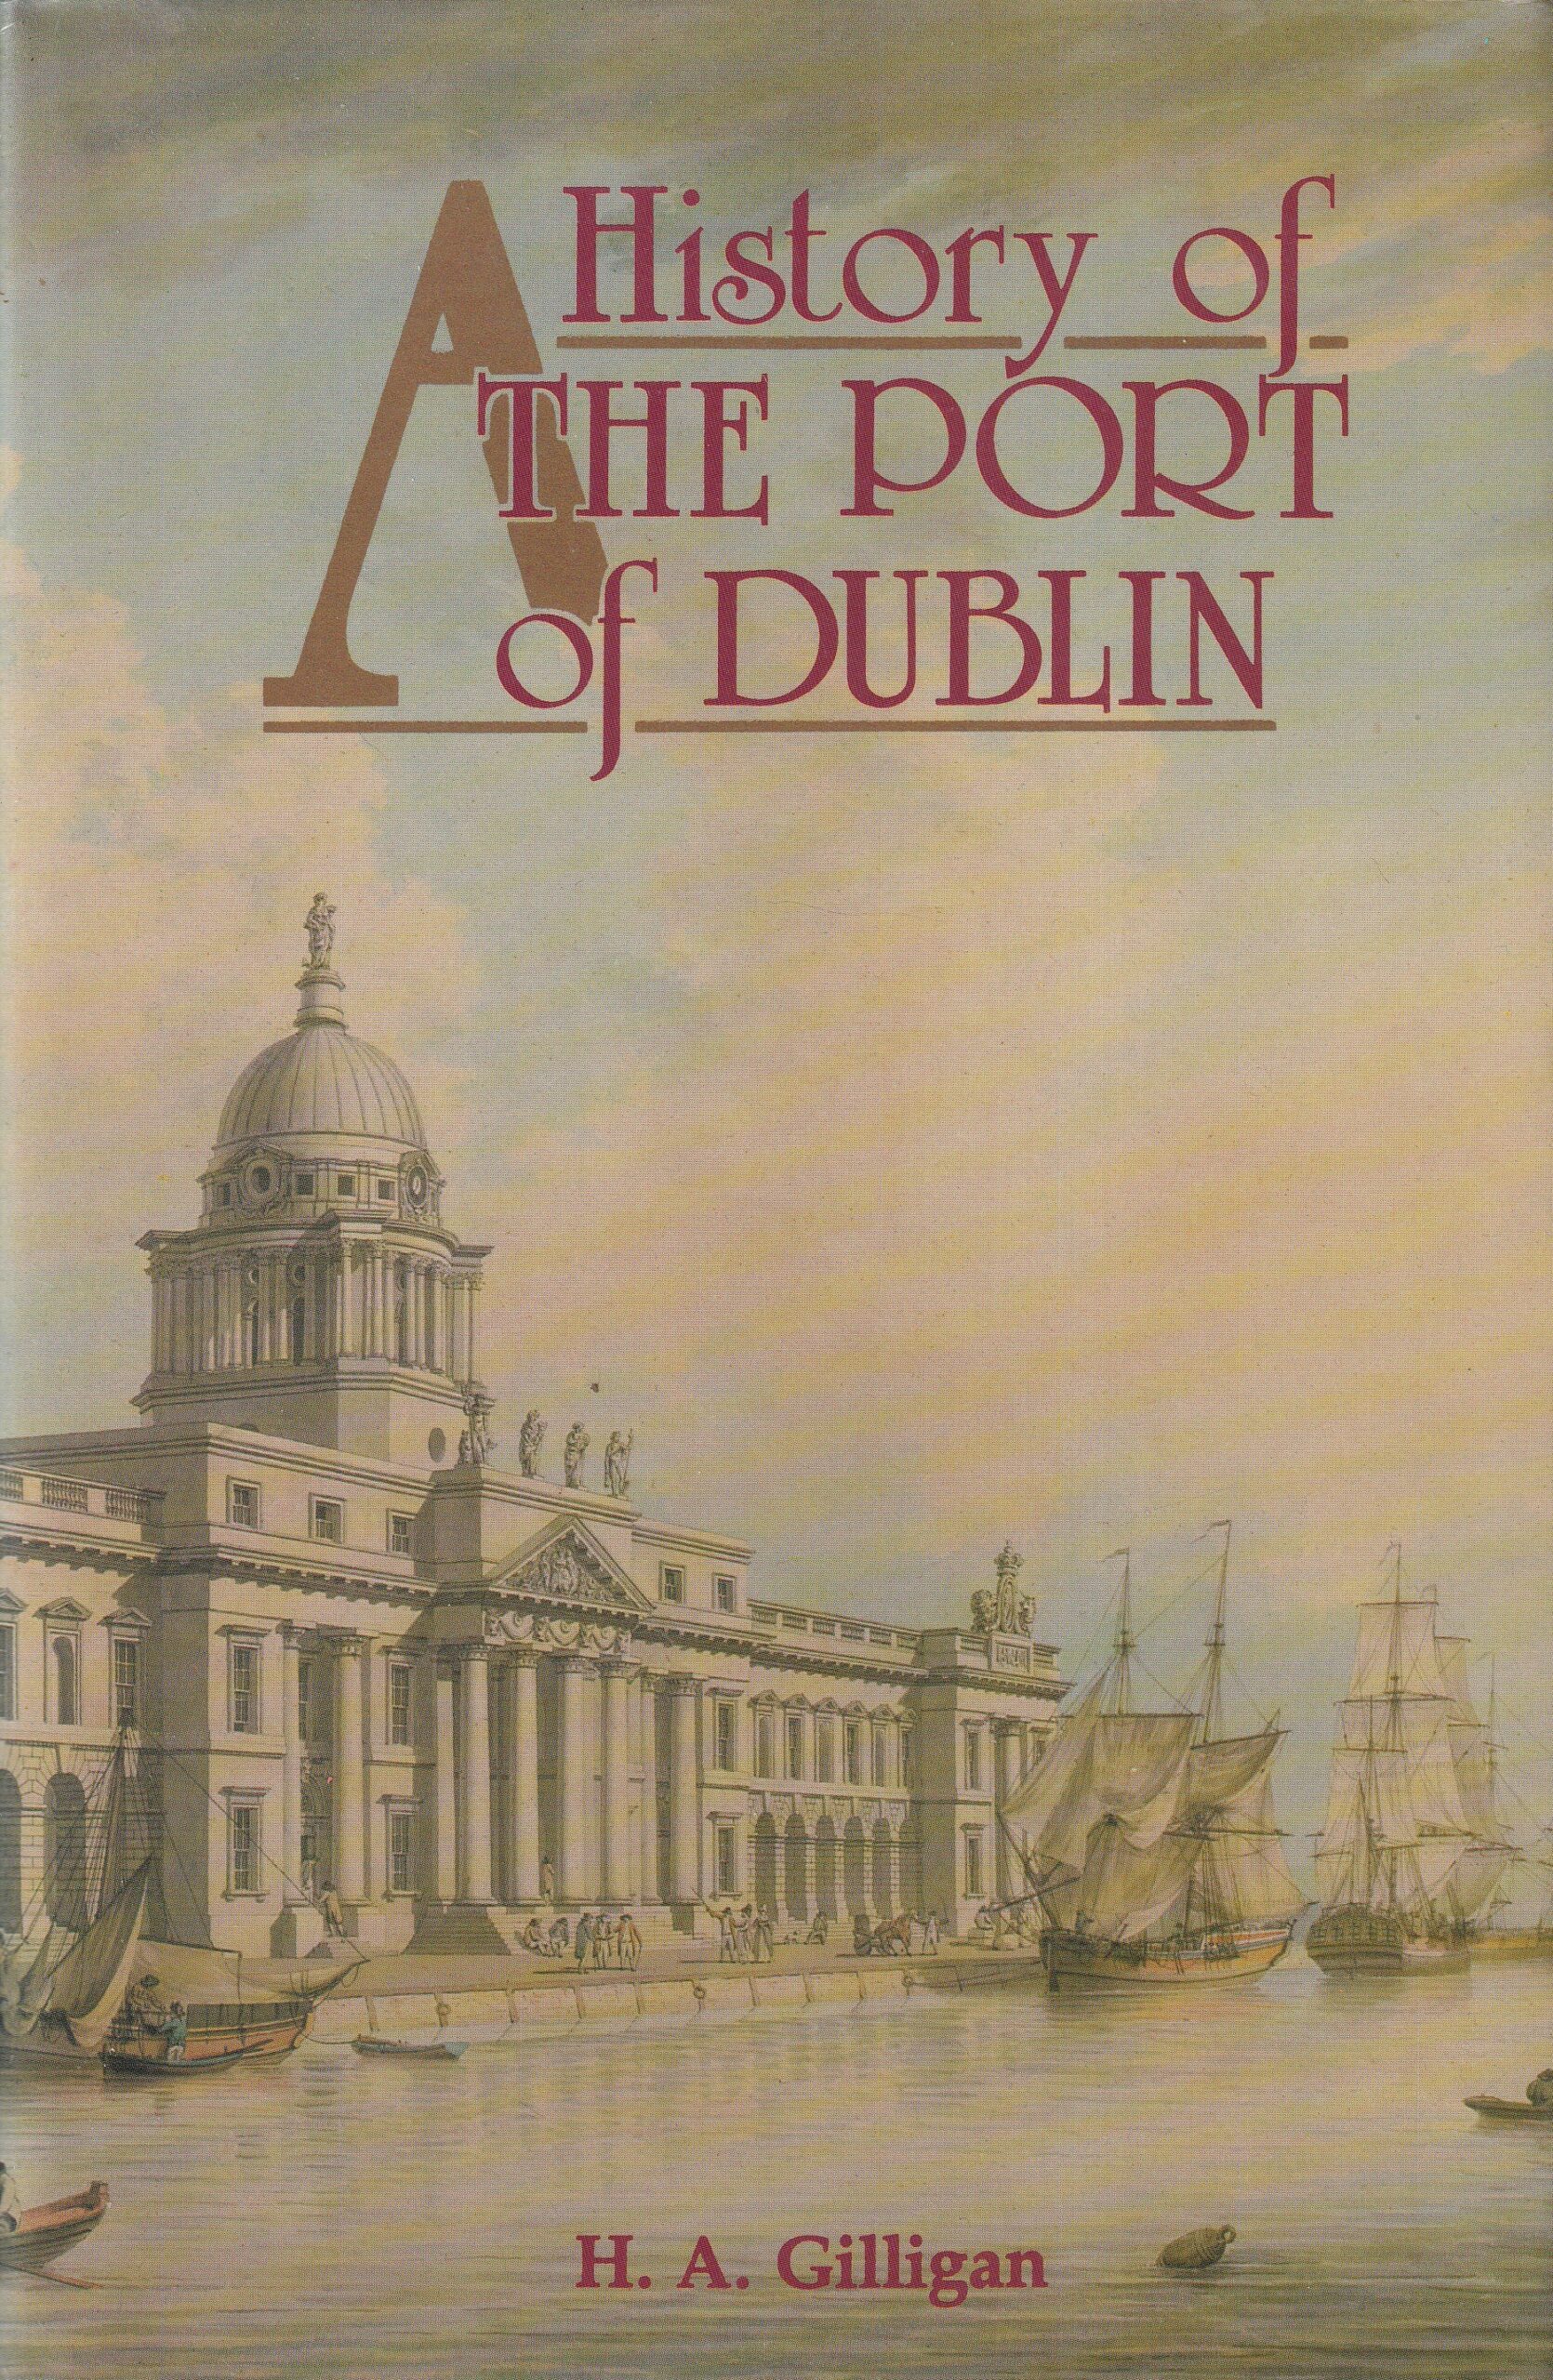 A History of the Port of Dublin by H. A. Gilligan